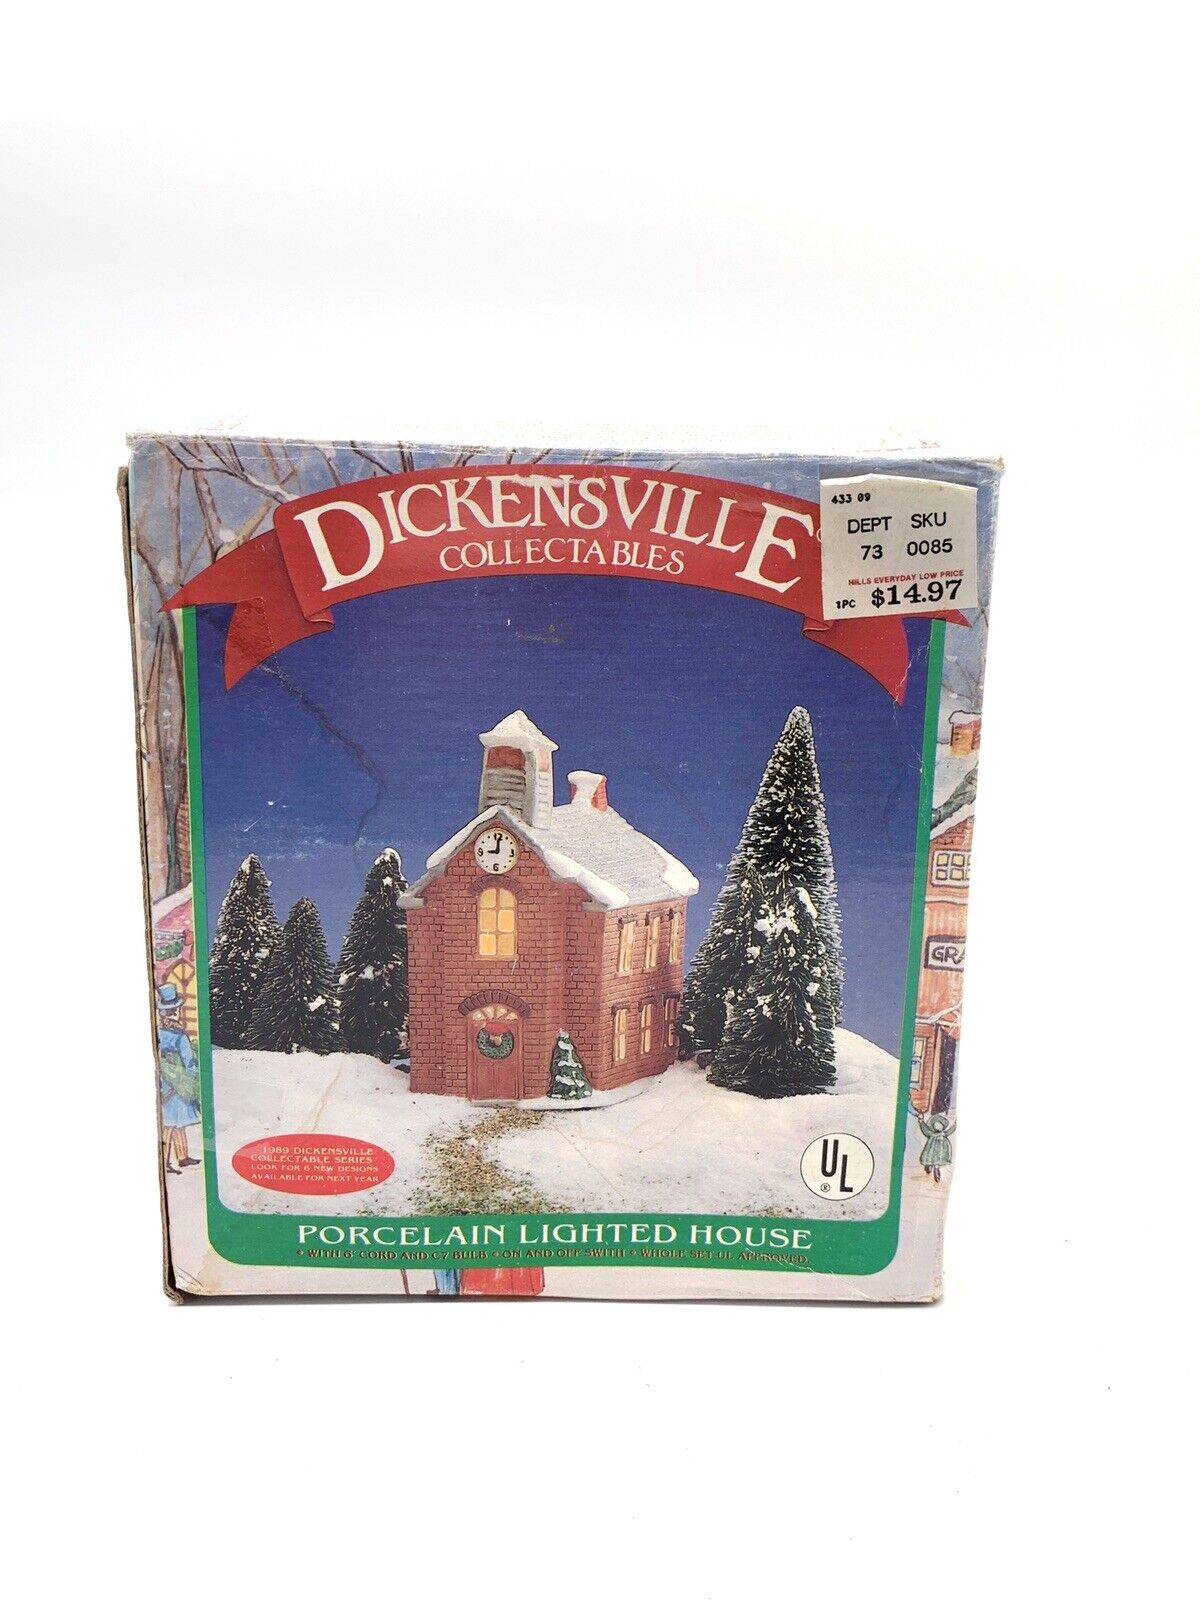 1989 Dickensville Porcelain Lighted Church Christmas Village Collectible